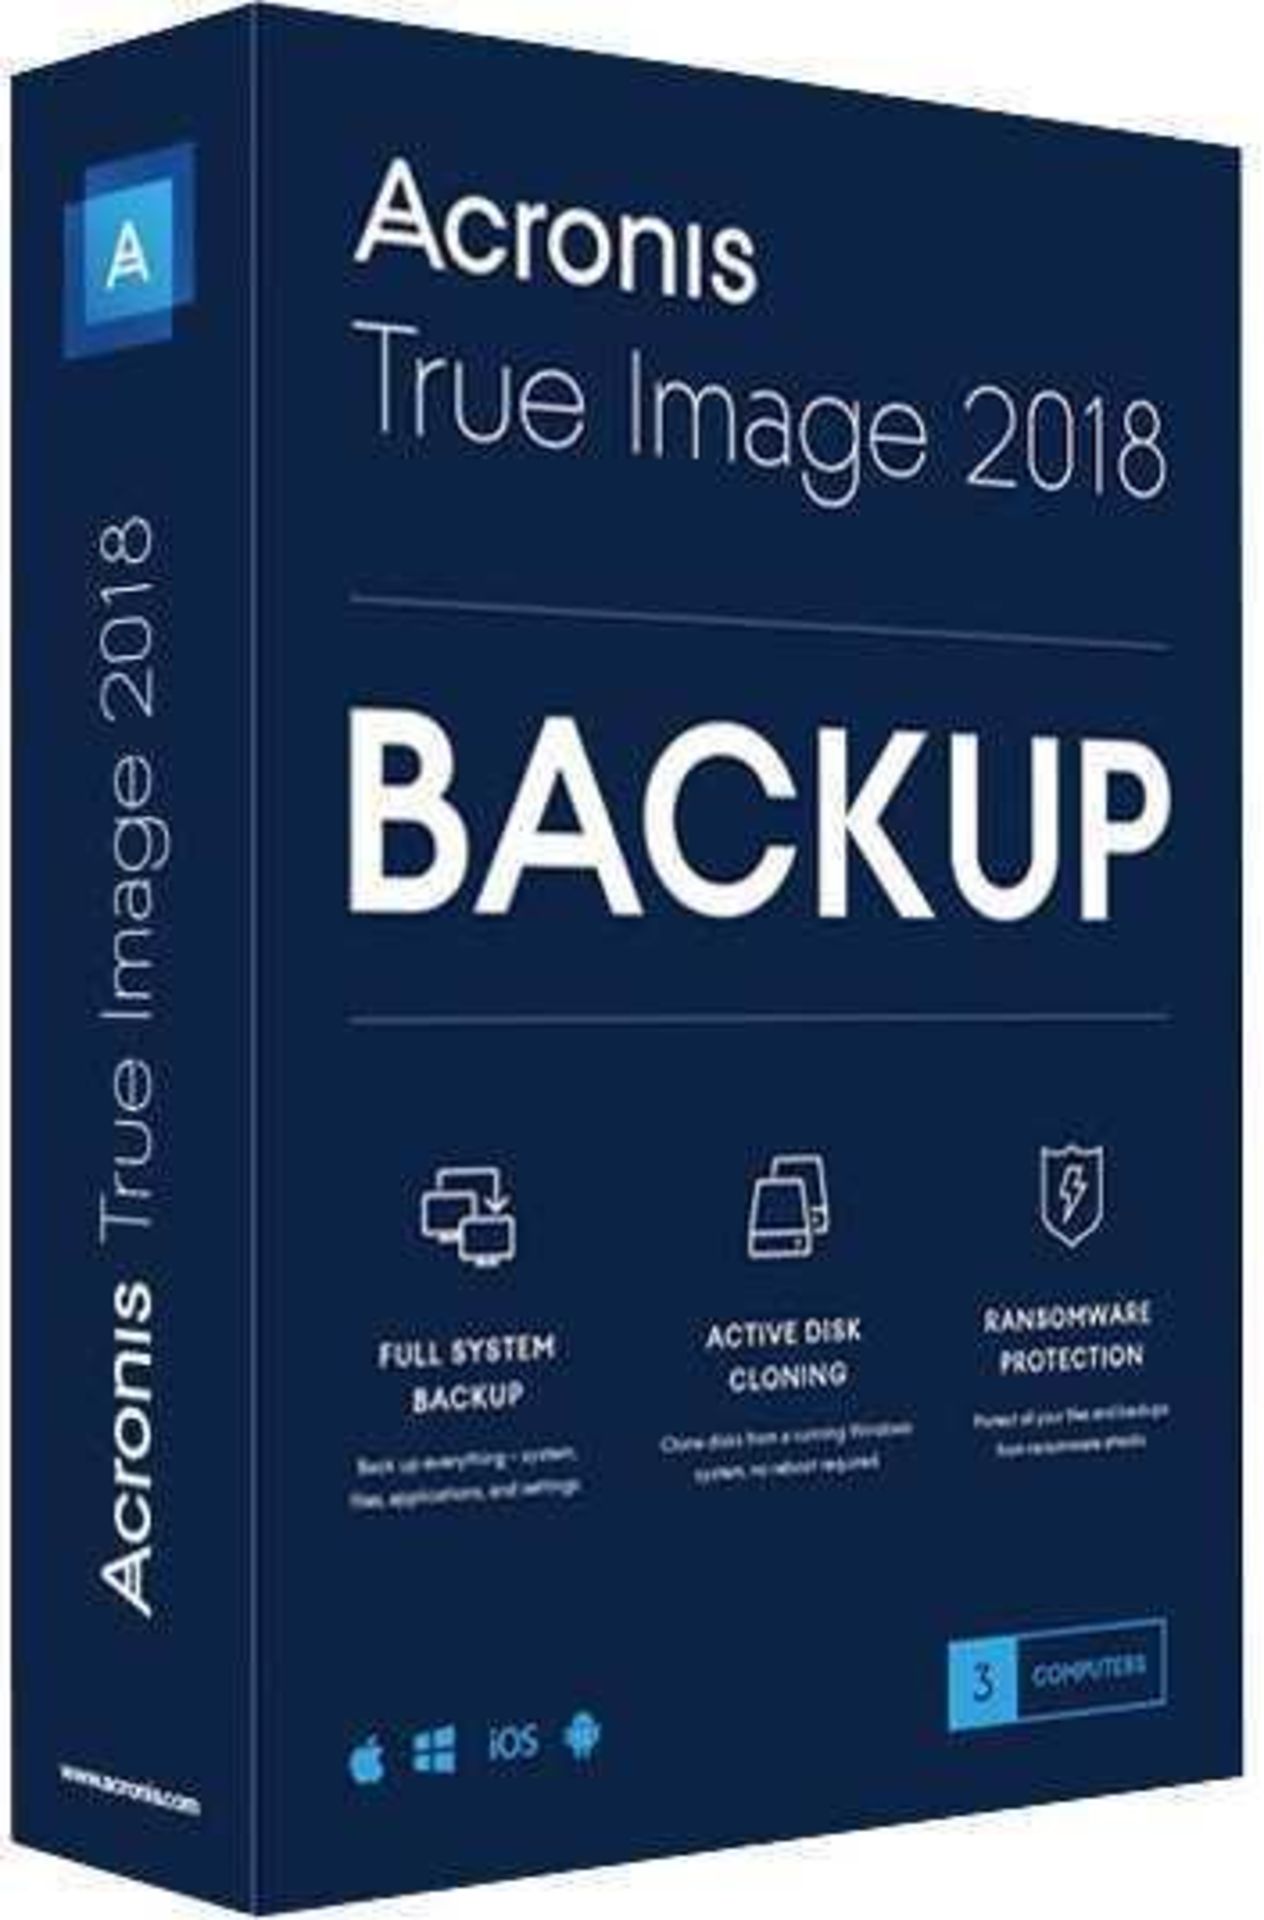 Rrp £40 Boxed Acronis True Image 2018 #1 Backup Software - Image 2 of 2